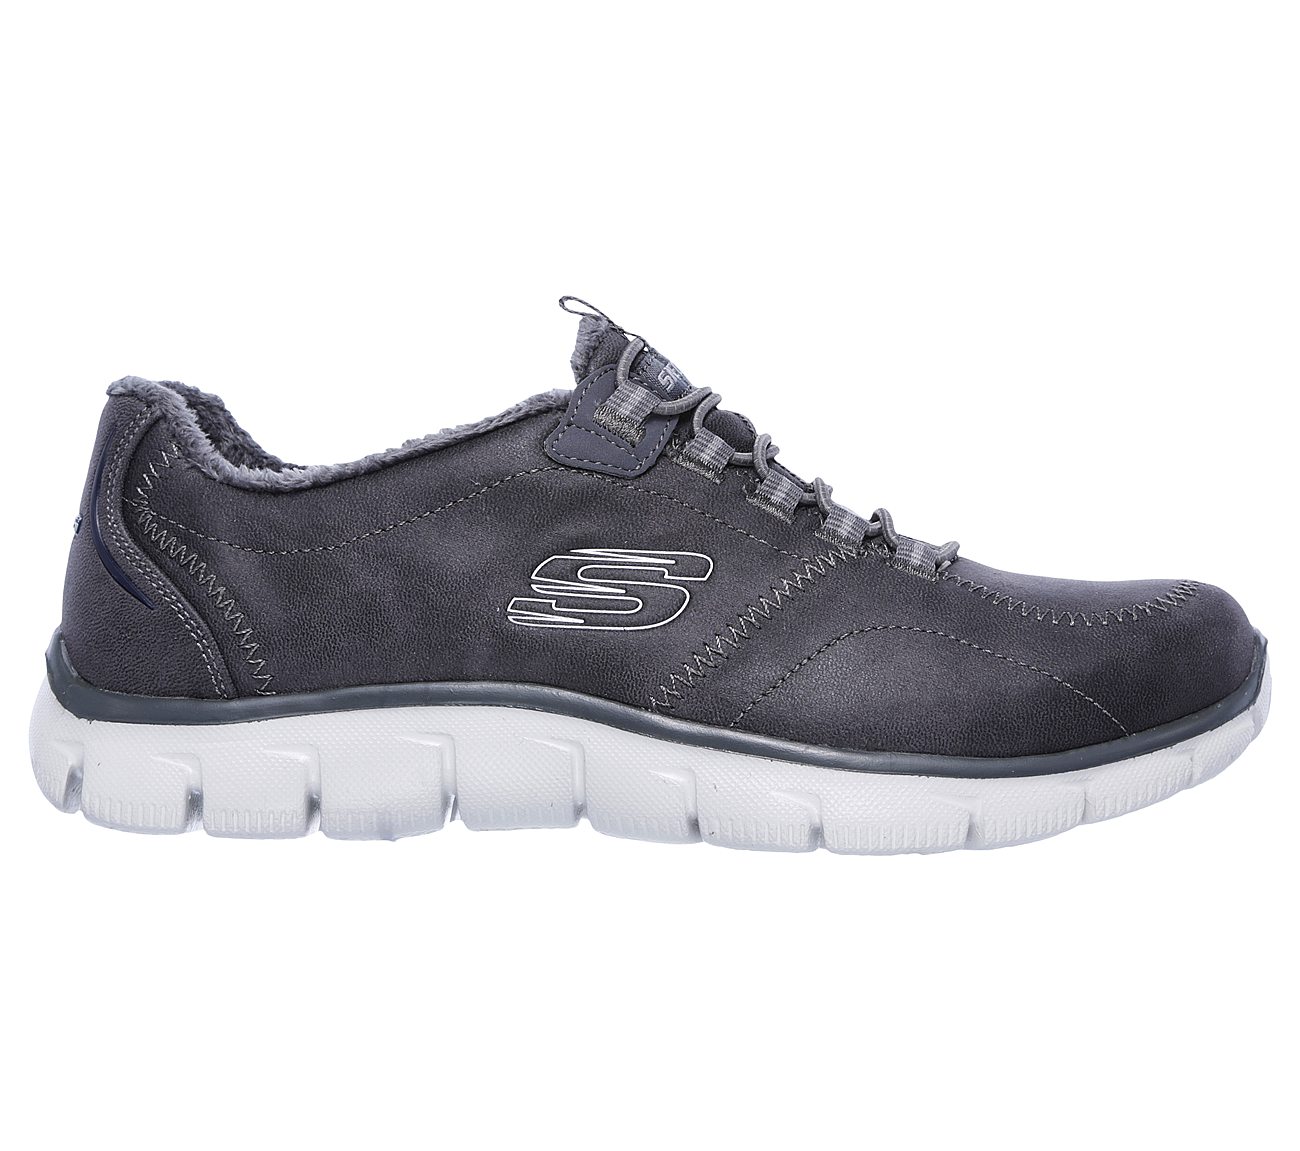 SKECHERS Relaxed Fit: Empire - Latest 